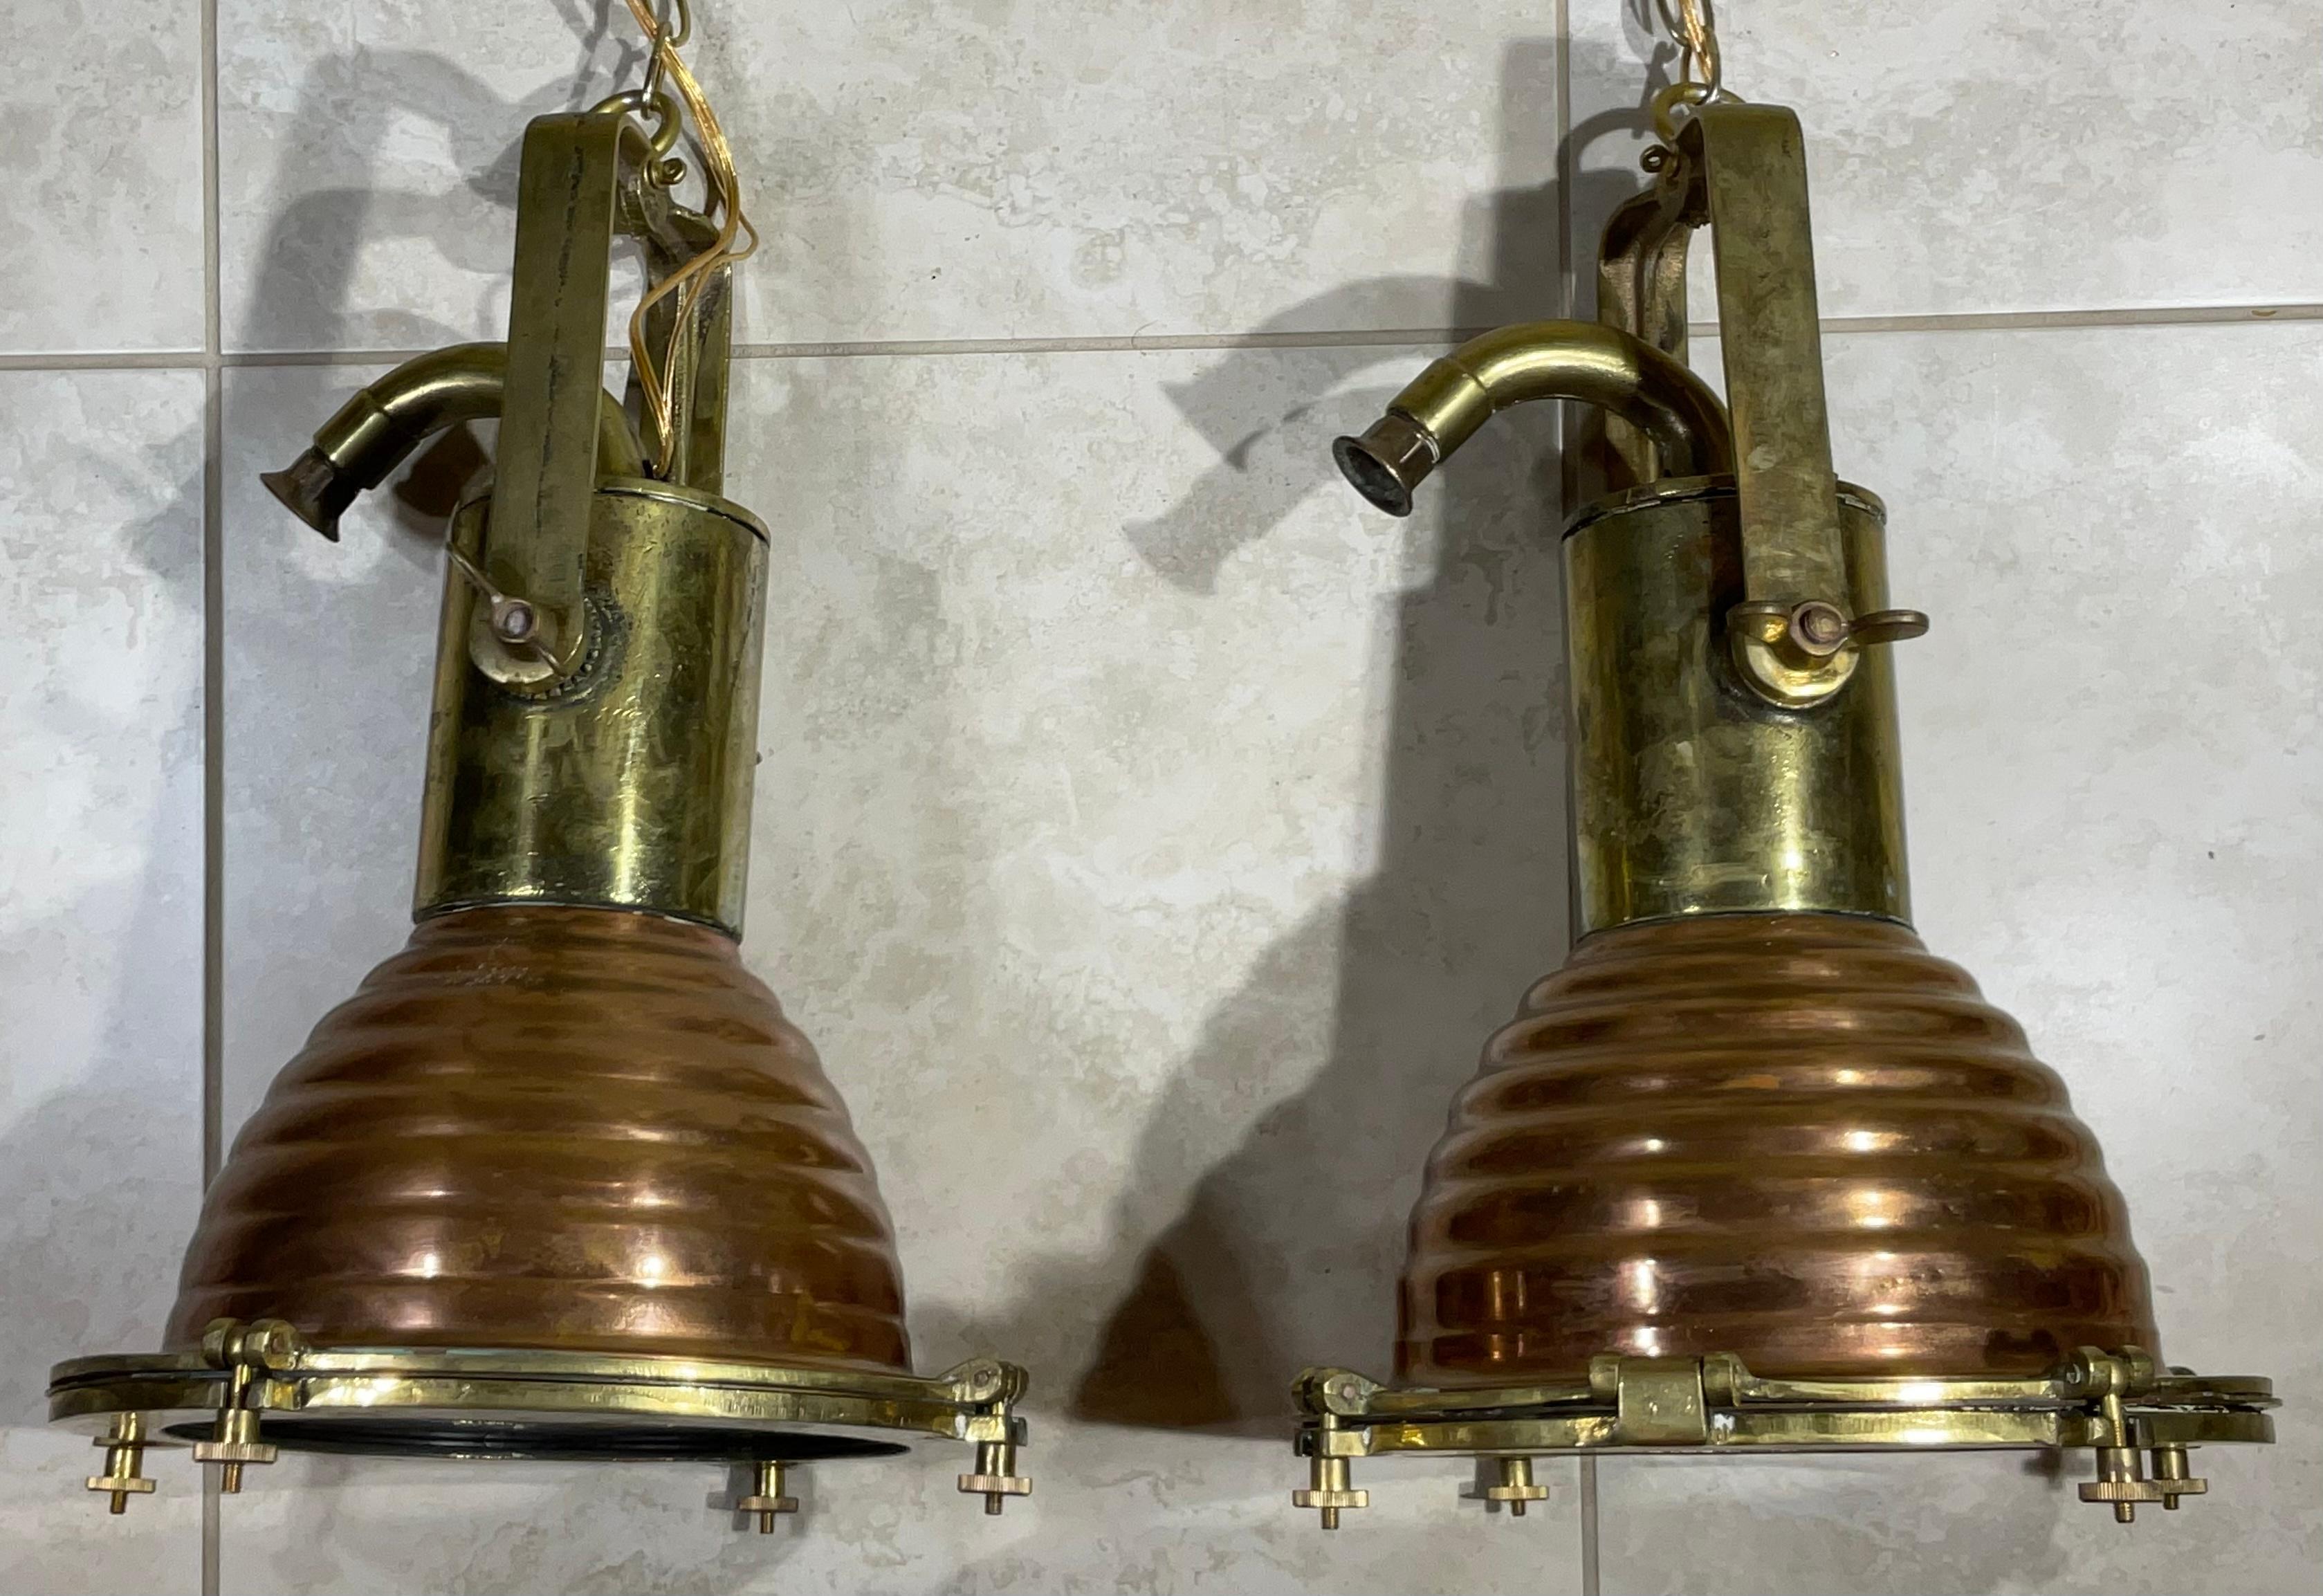 Pair of stylish light fixture pendants made of hand crafted solid brass and solid copper come with all the original brass canopies and chain intact. They are in a good / used condition and the beautifully patinated two tone brass and copper shades .